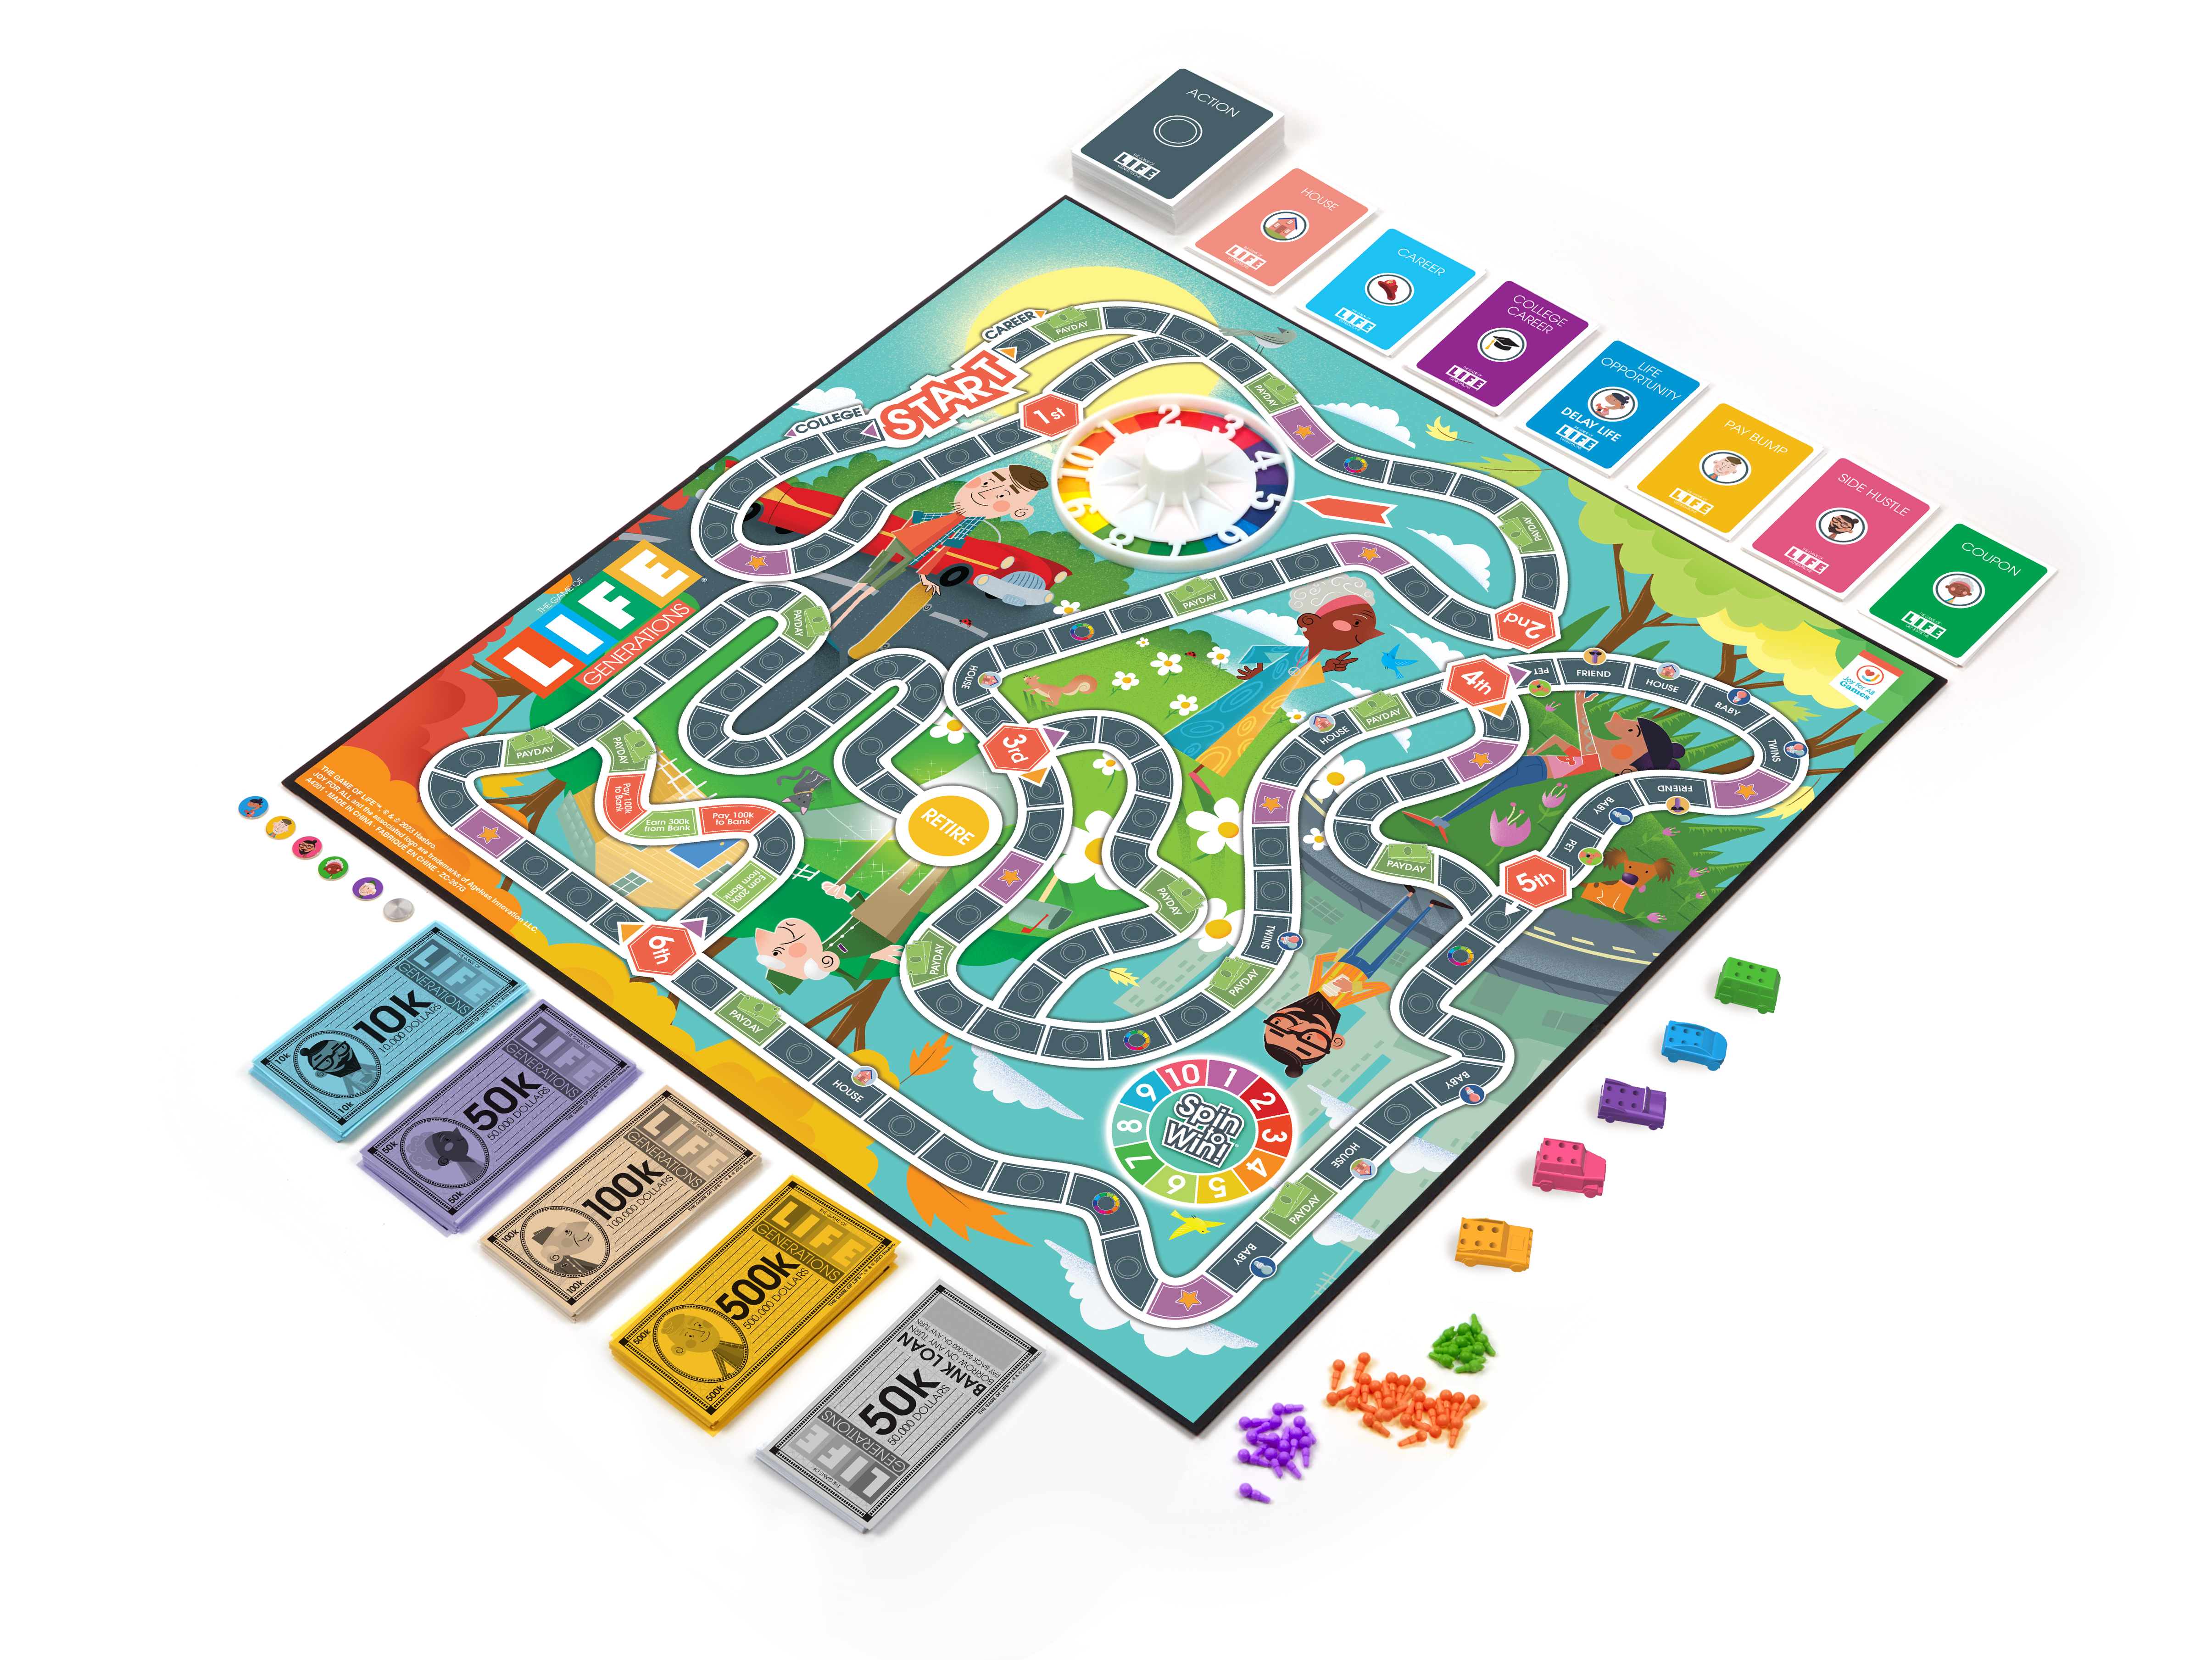 The Game of Life from Hasbro 